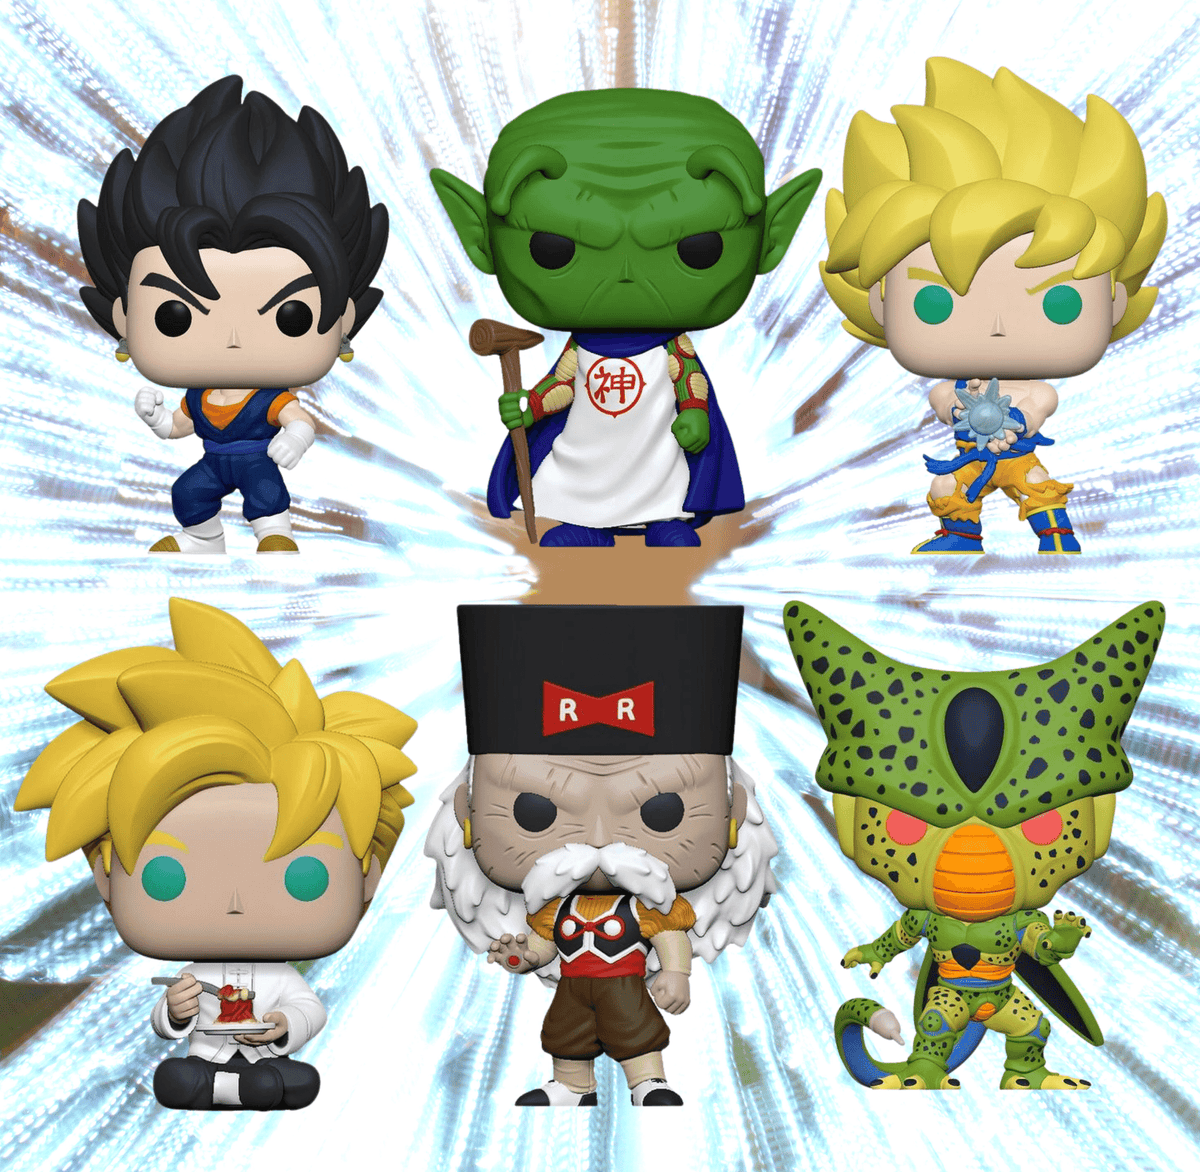 Dragon Ball Z Funko Pop! Complete Set of 6 (2021 Release) (PreOrder